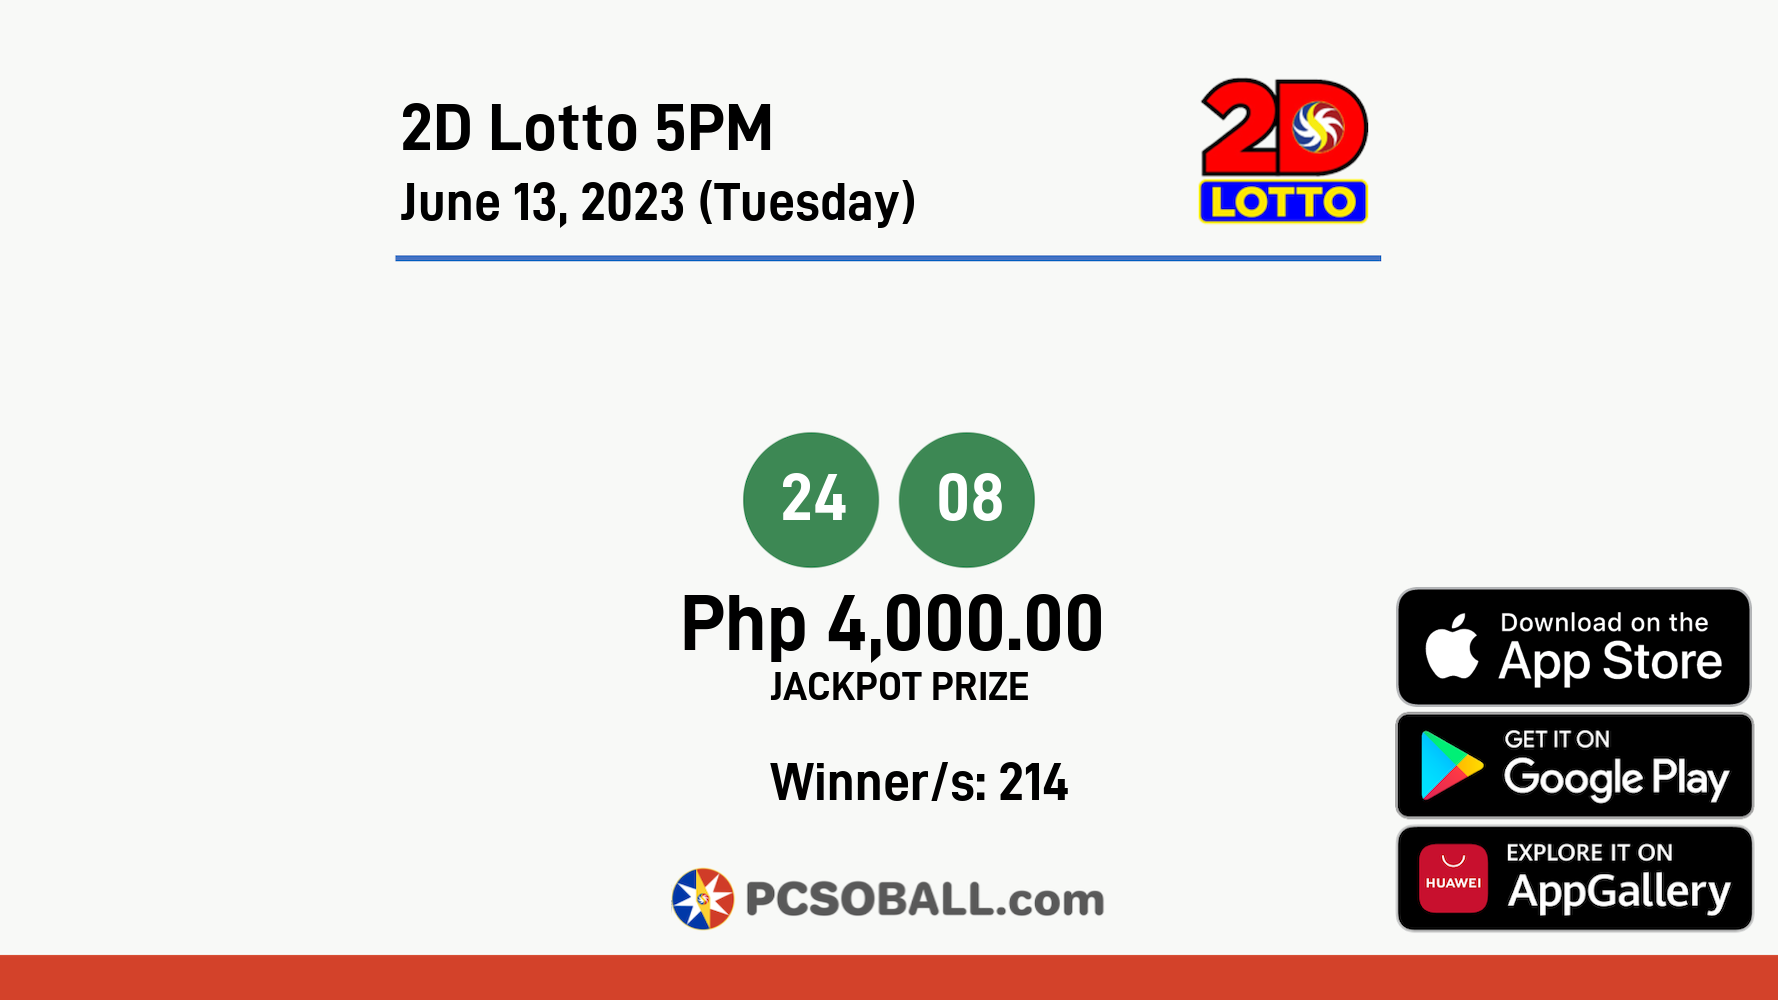 2D Lotto 5PM June 13, 2023 (Tuesday) Result